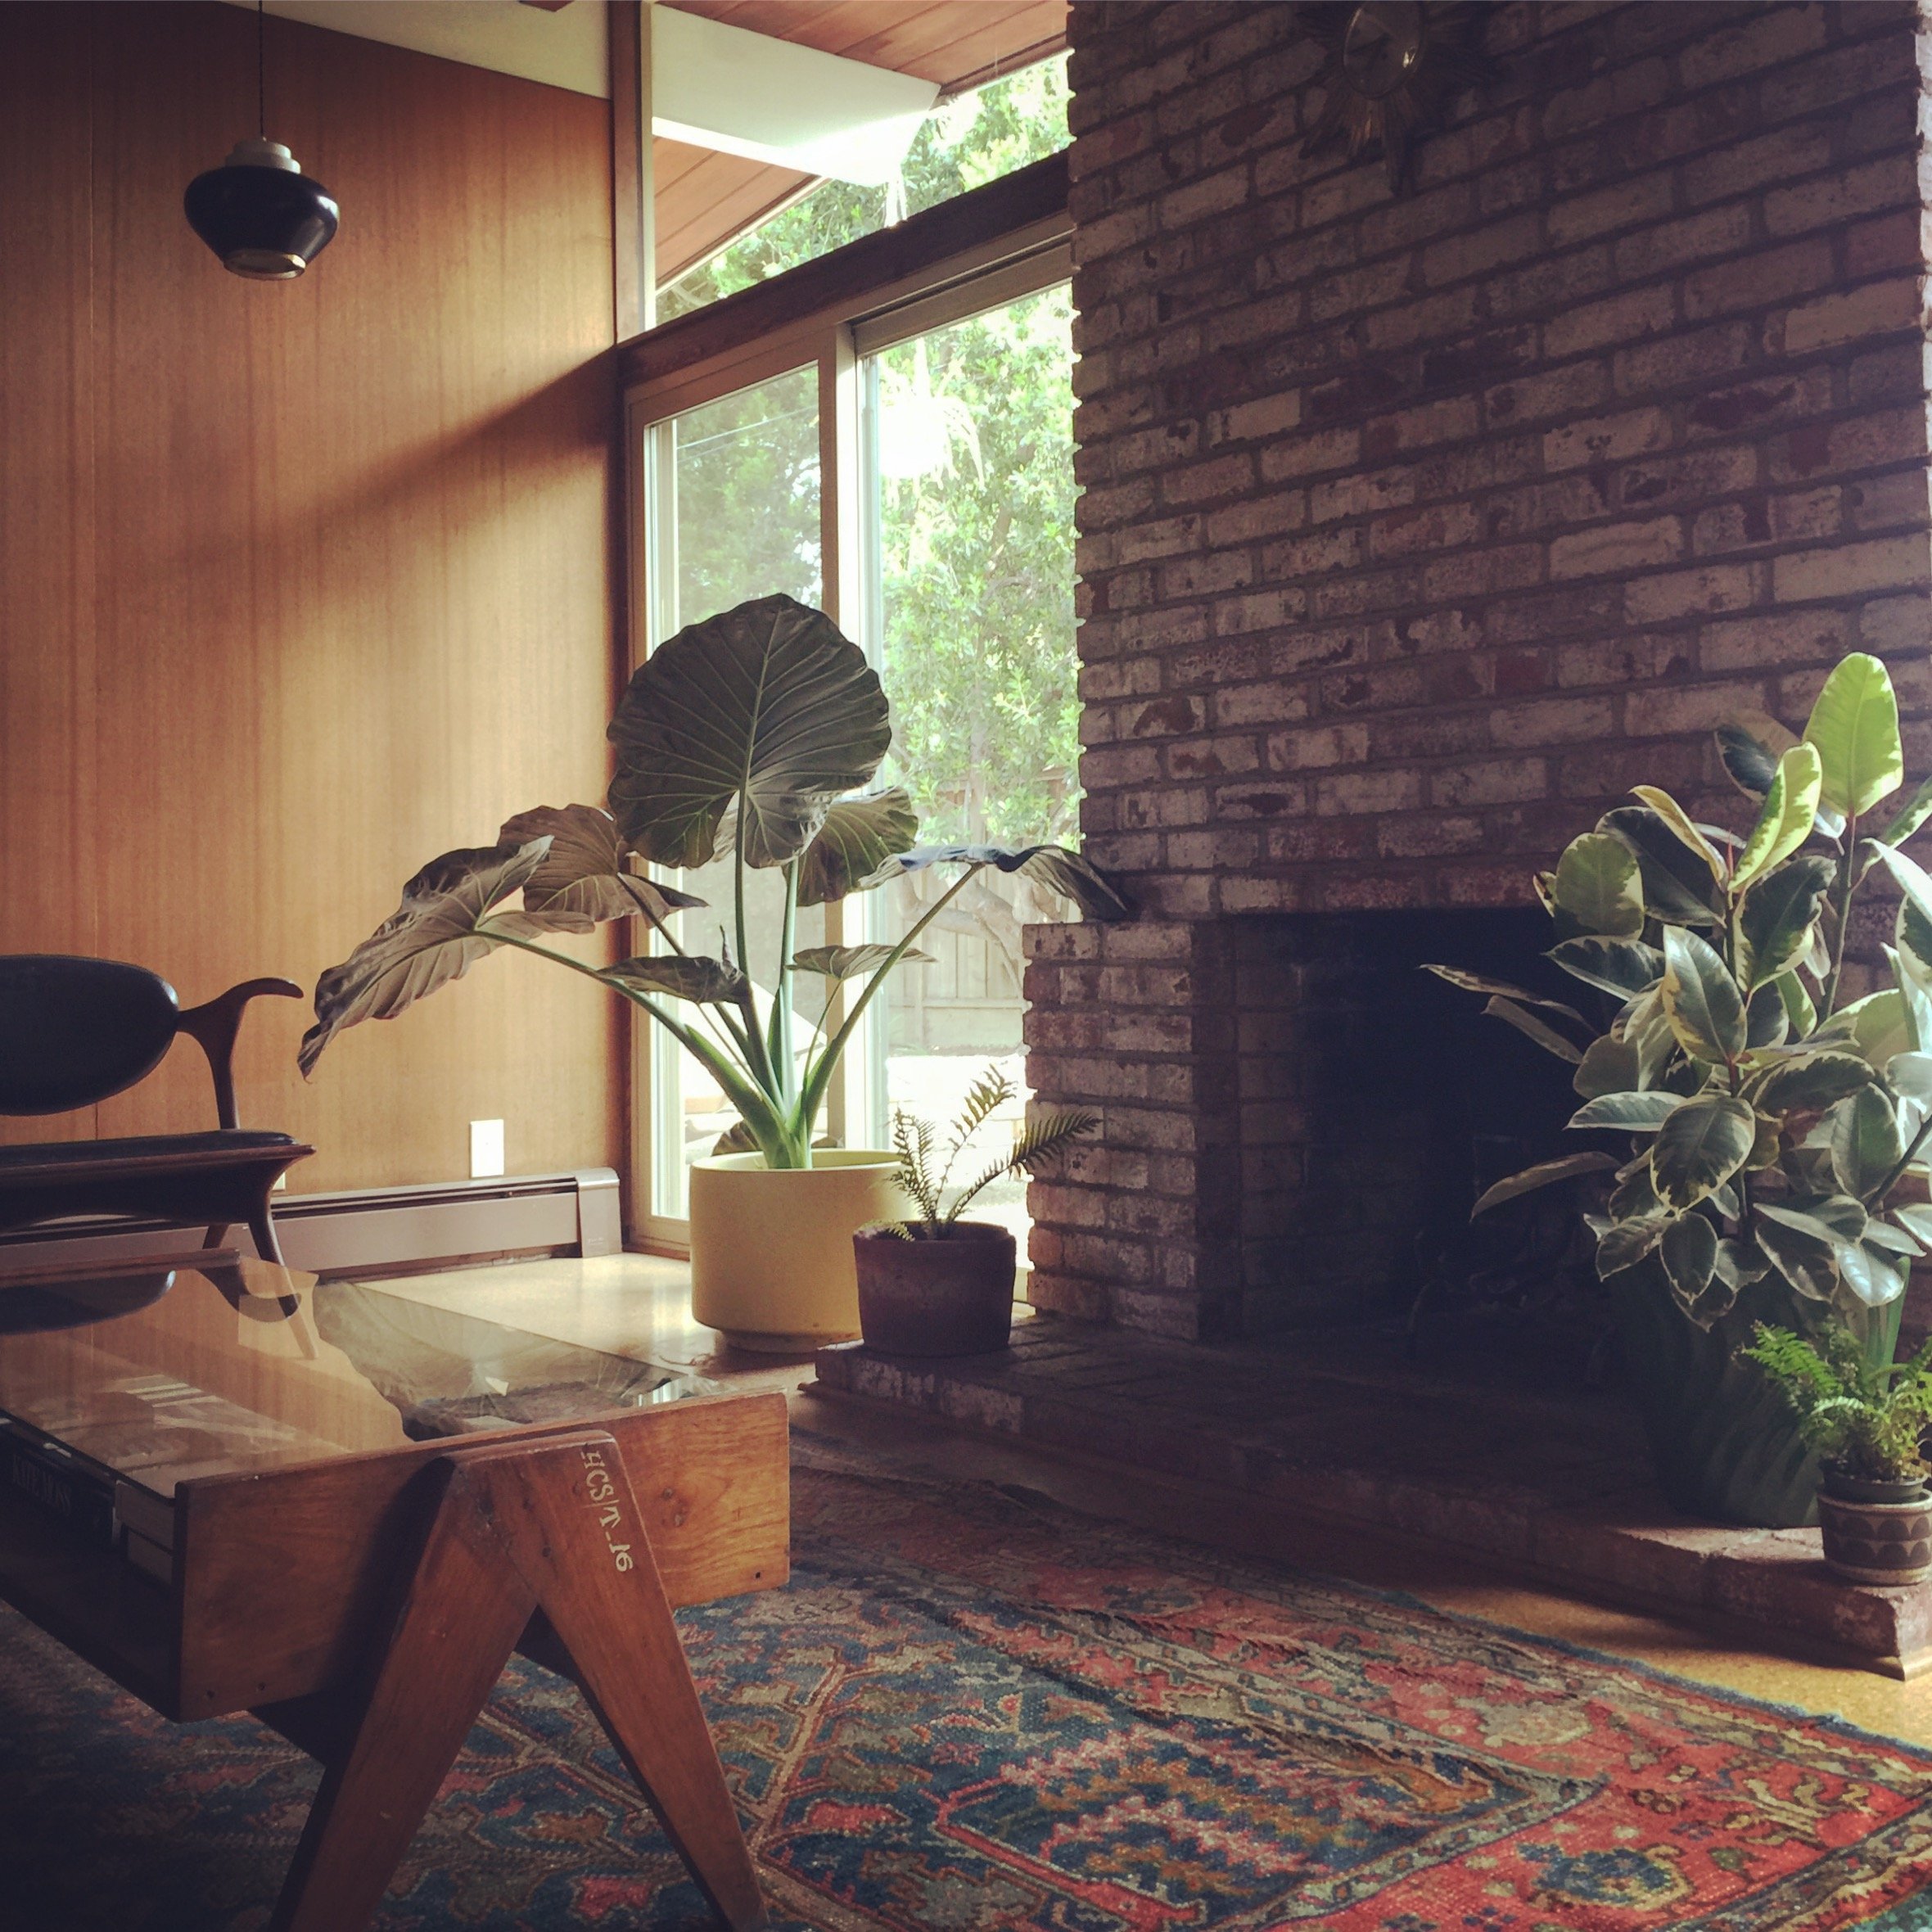 Amy Keeler - Eichler House in Palo Alto - interview - living room